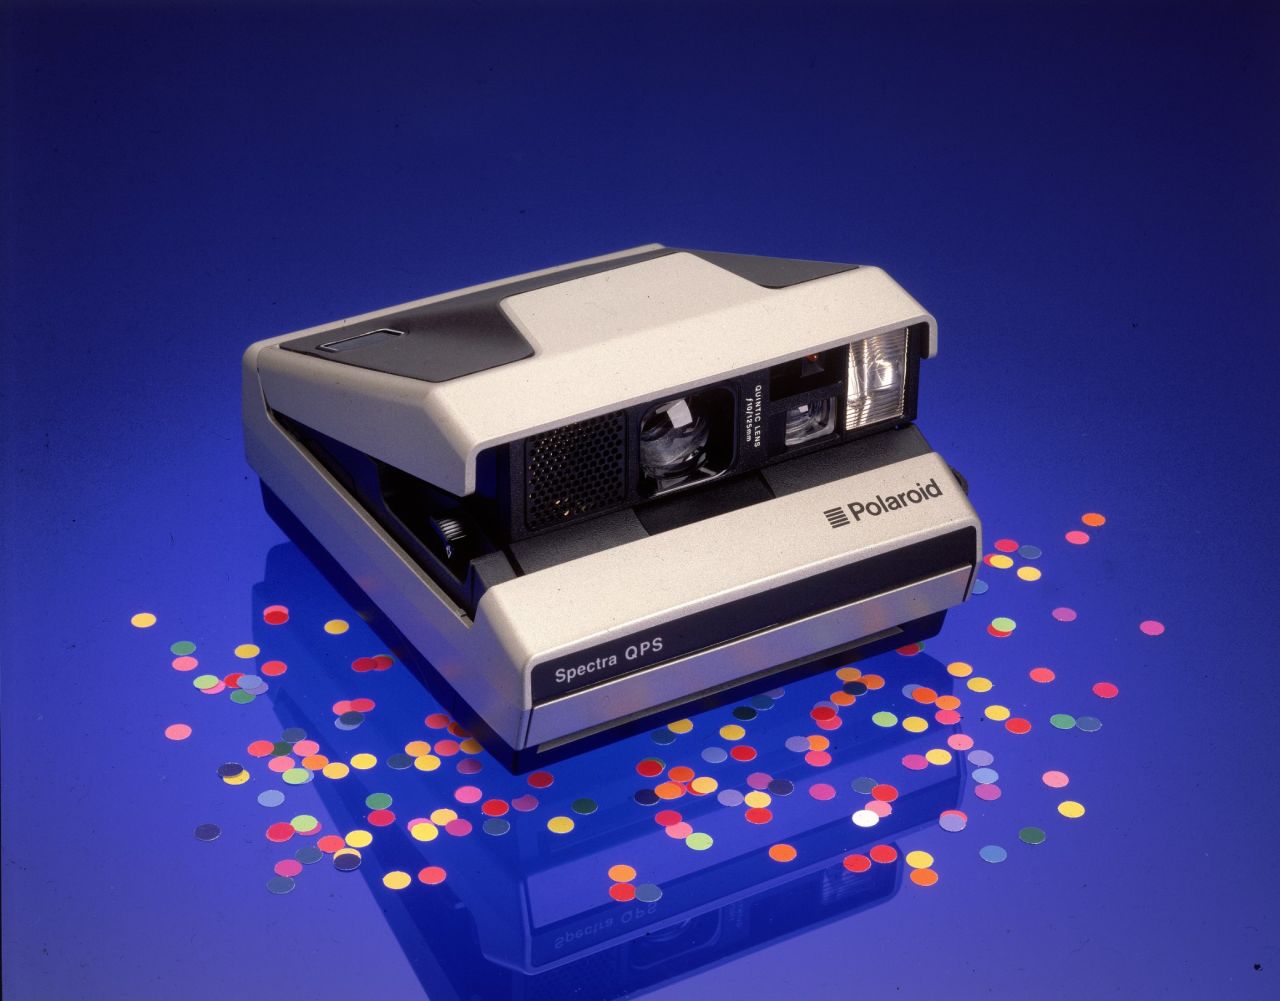 Long before there was Instagram, Polaroid was king. The Polaroid celebrated its 75th anniversary in 2012. But by then most of us had no more need to ever shake a Polaroid picture again. Not entirely resurrected, Polaroids are retro-cool and often pop up at weddings and other celebrations.